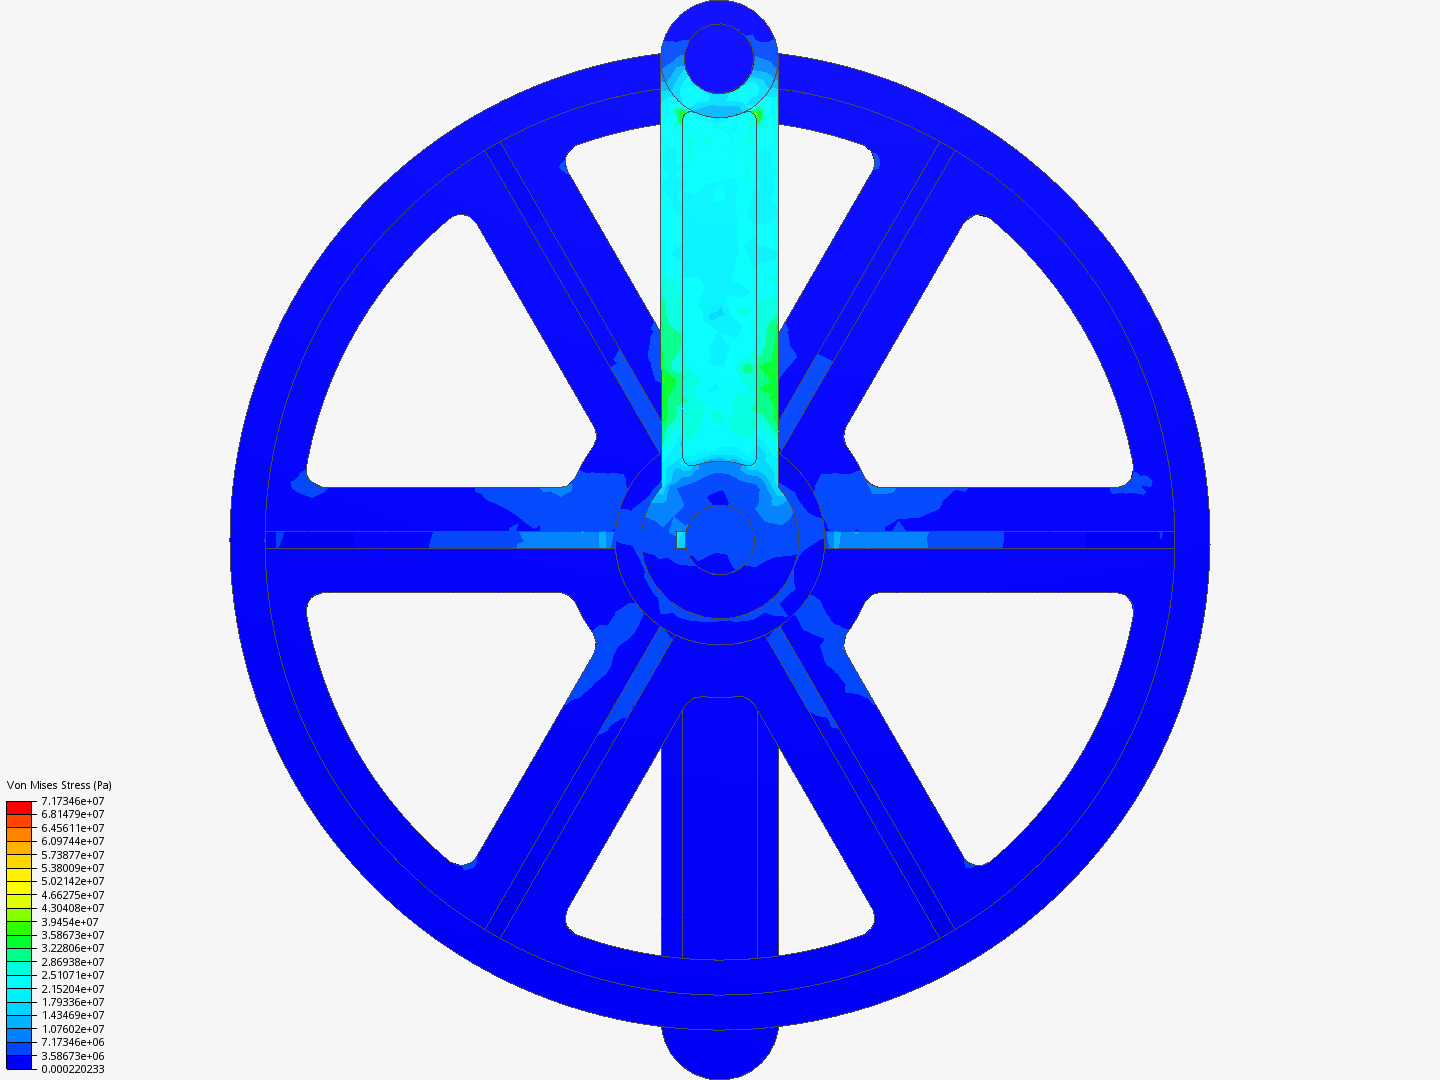 Simulation of a Crank Assembly - PRACTICAL image